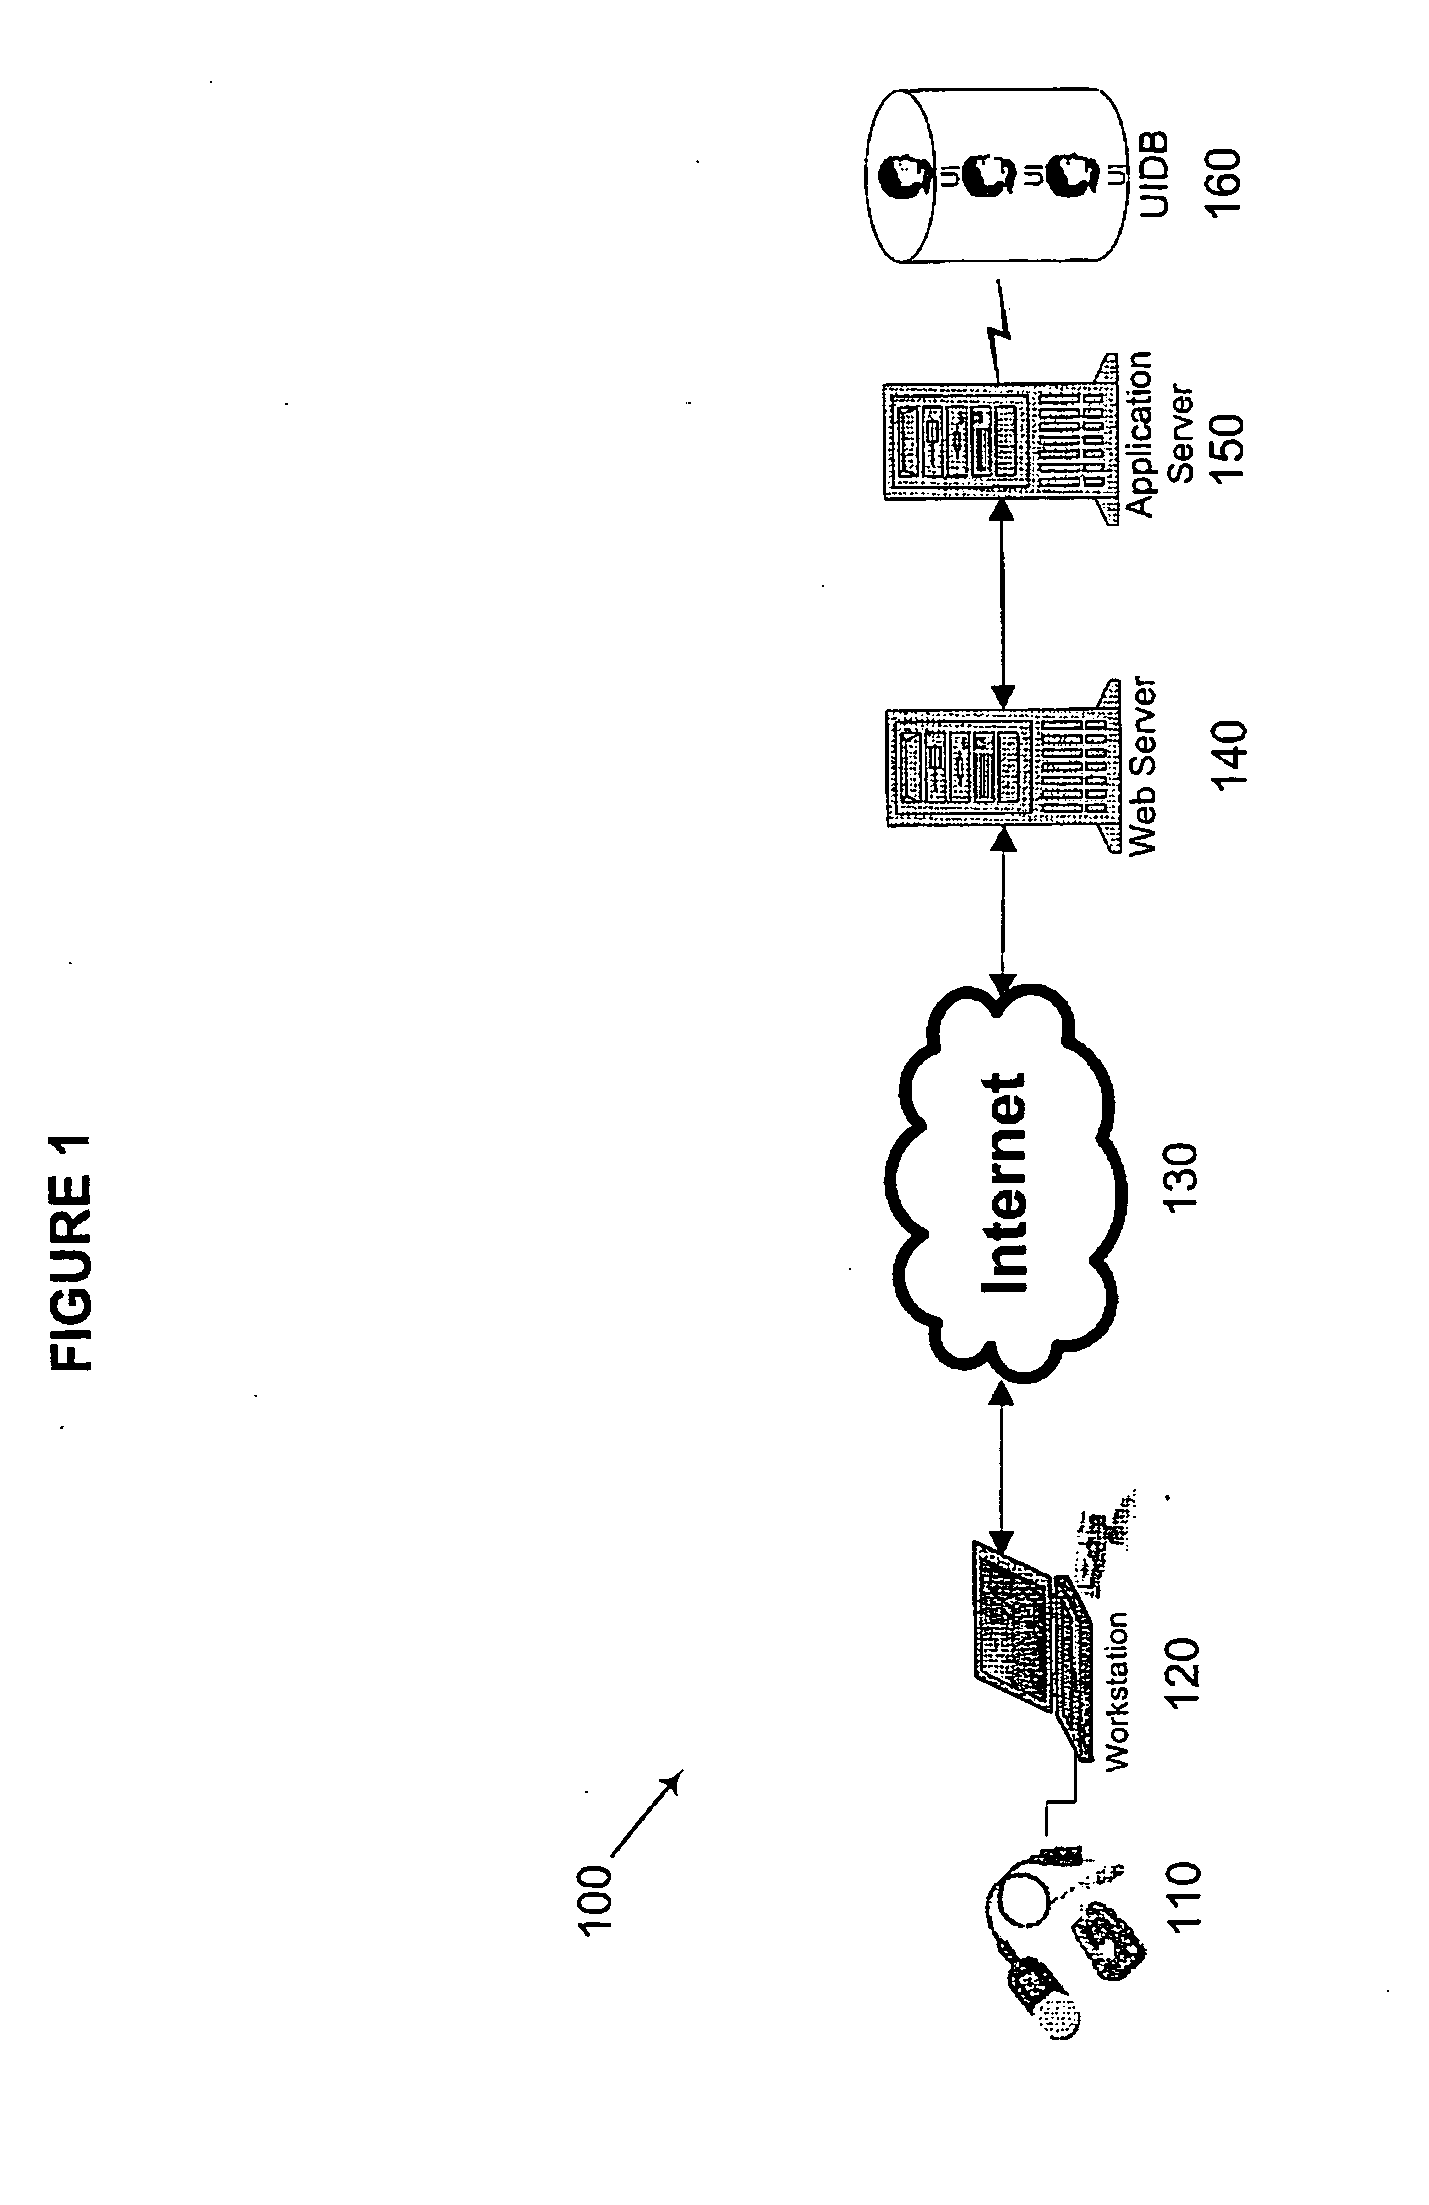 Method and system for biometric identification and authentication having an exception mode